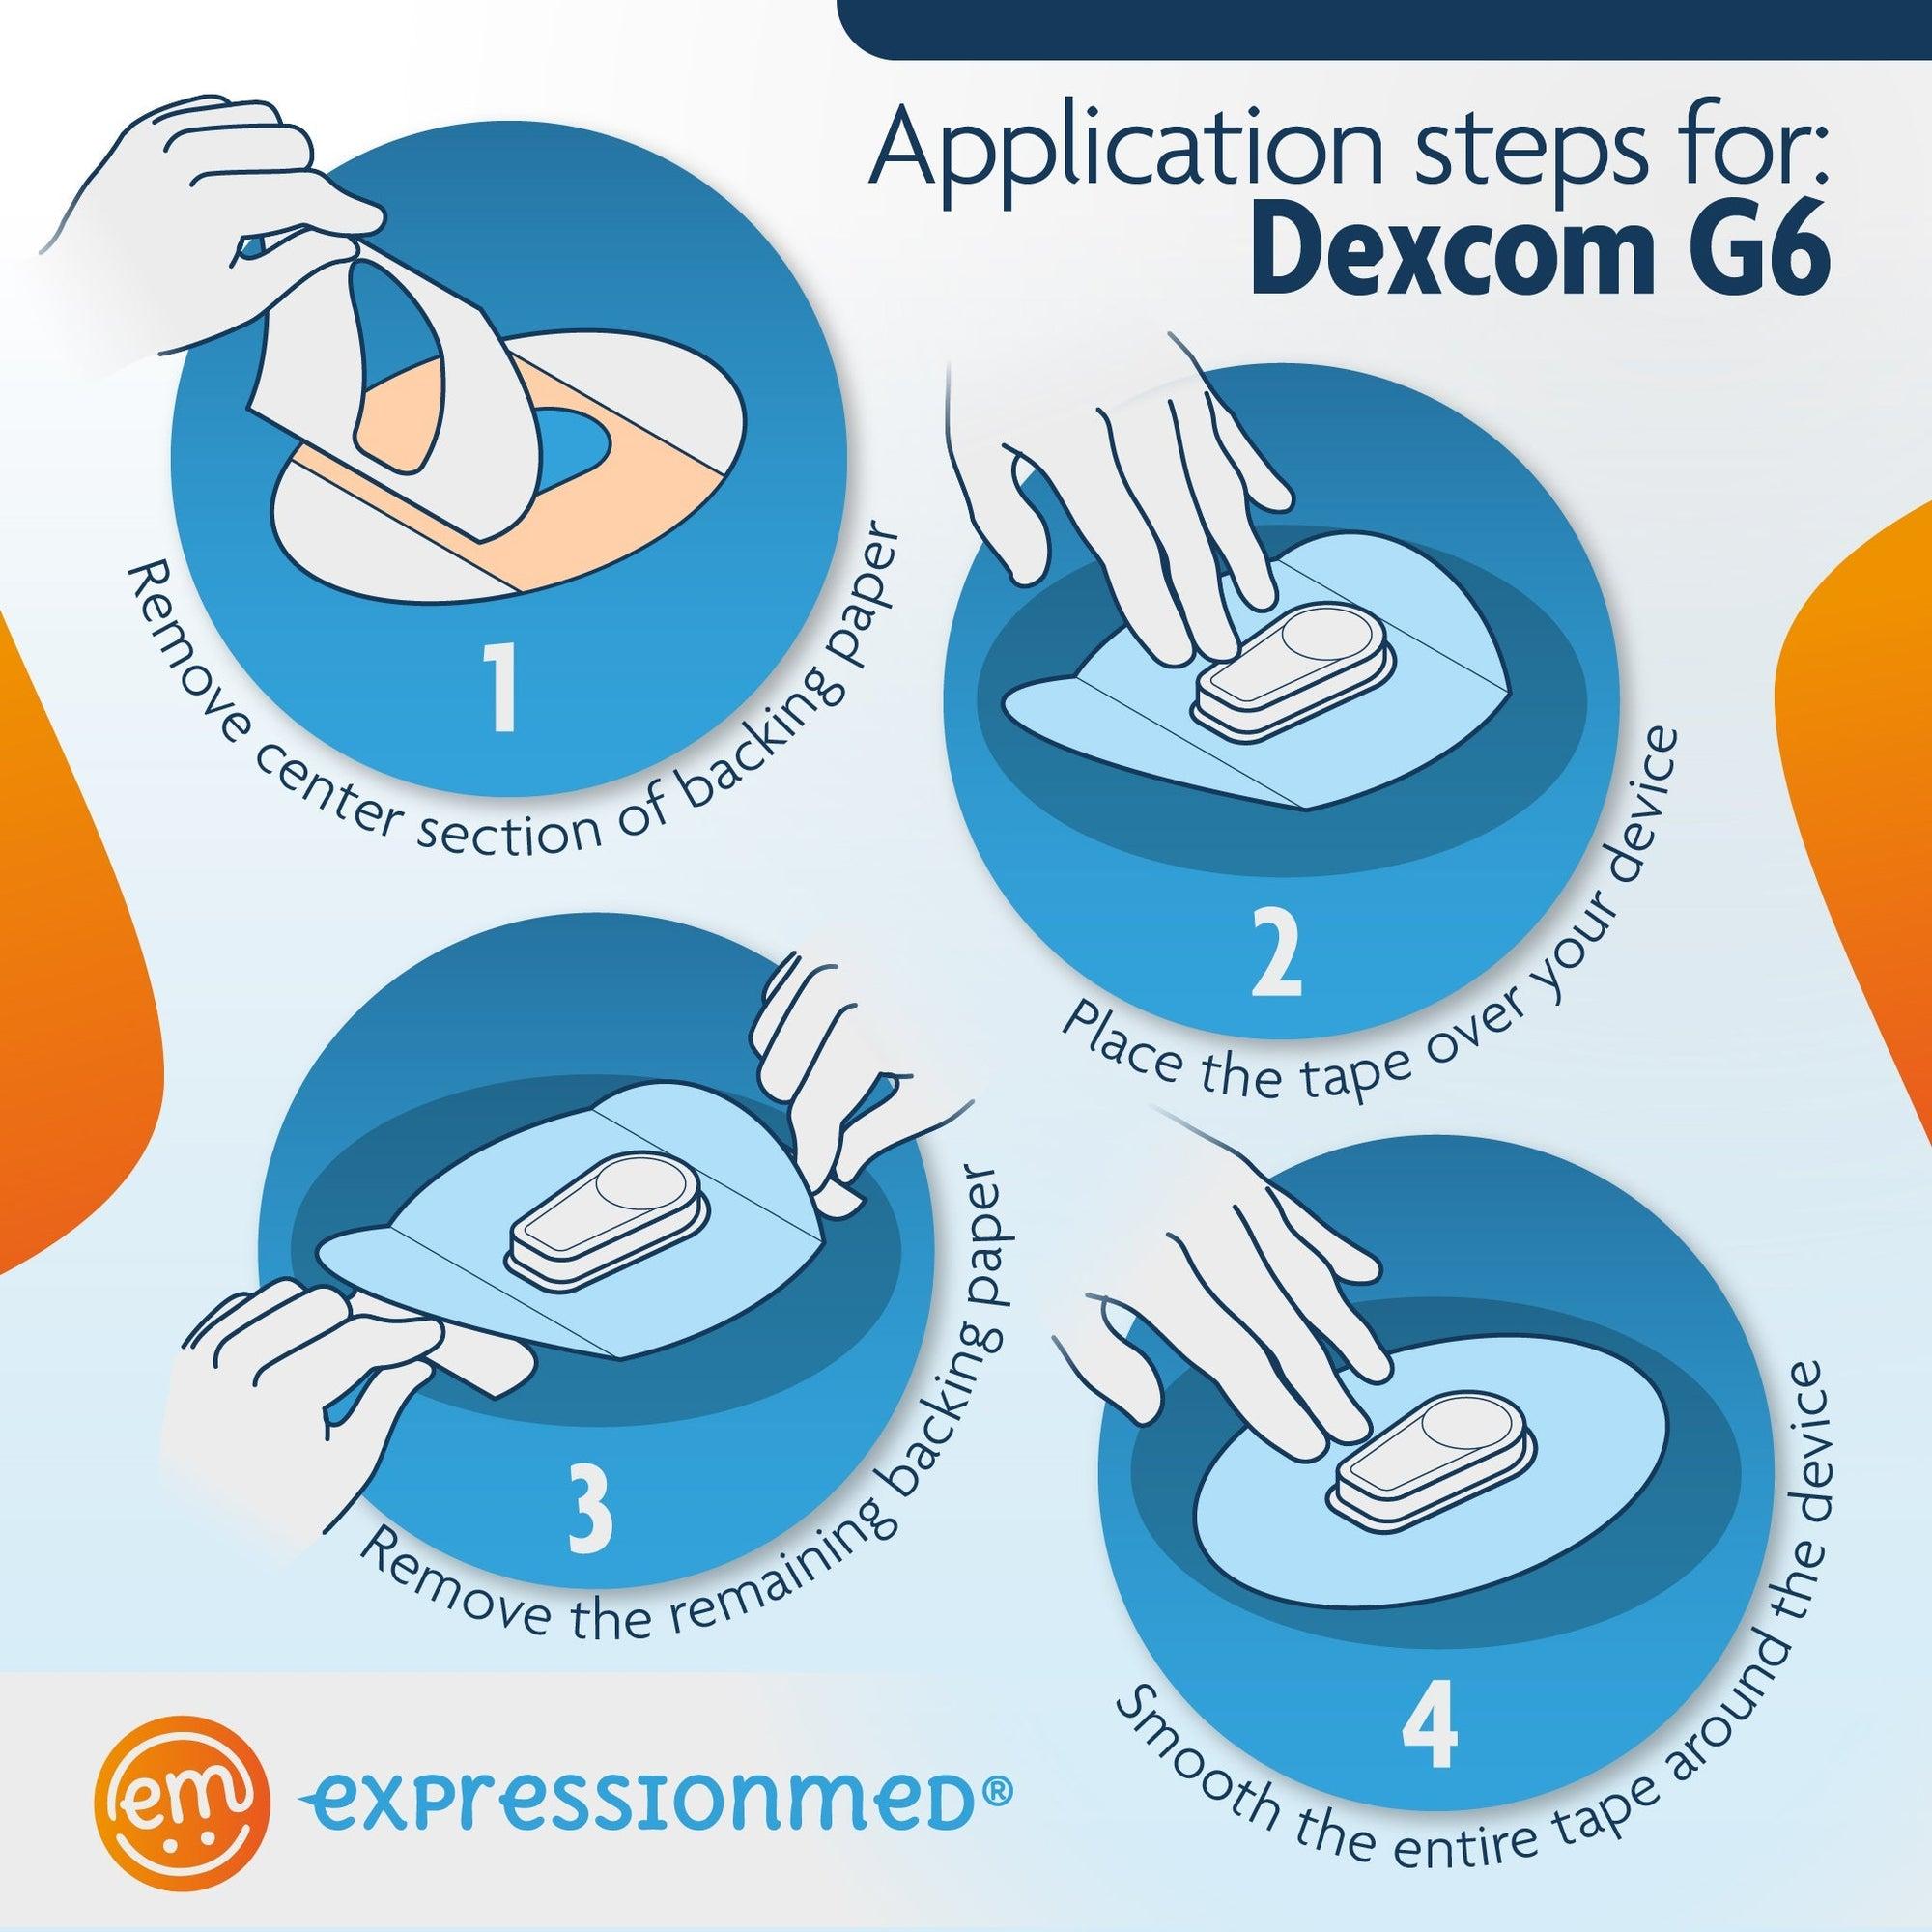 ExpressionMed Application Instructions. 1. Prep skin with soap and water. 2. Remove Middle Section and lay center hole over device. 3. Peel off both end sections and smooth down on skin. To remove, hold an edge and stretch material off skin.